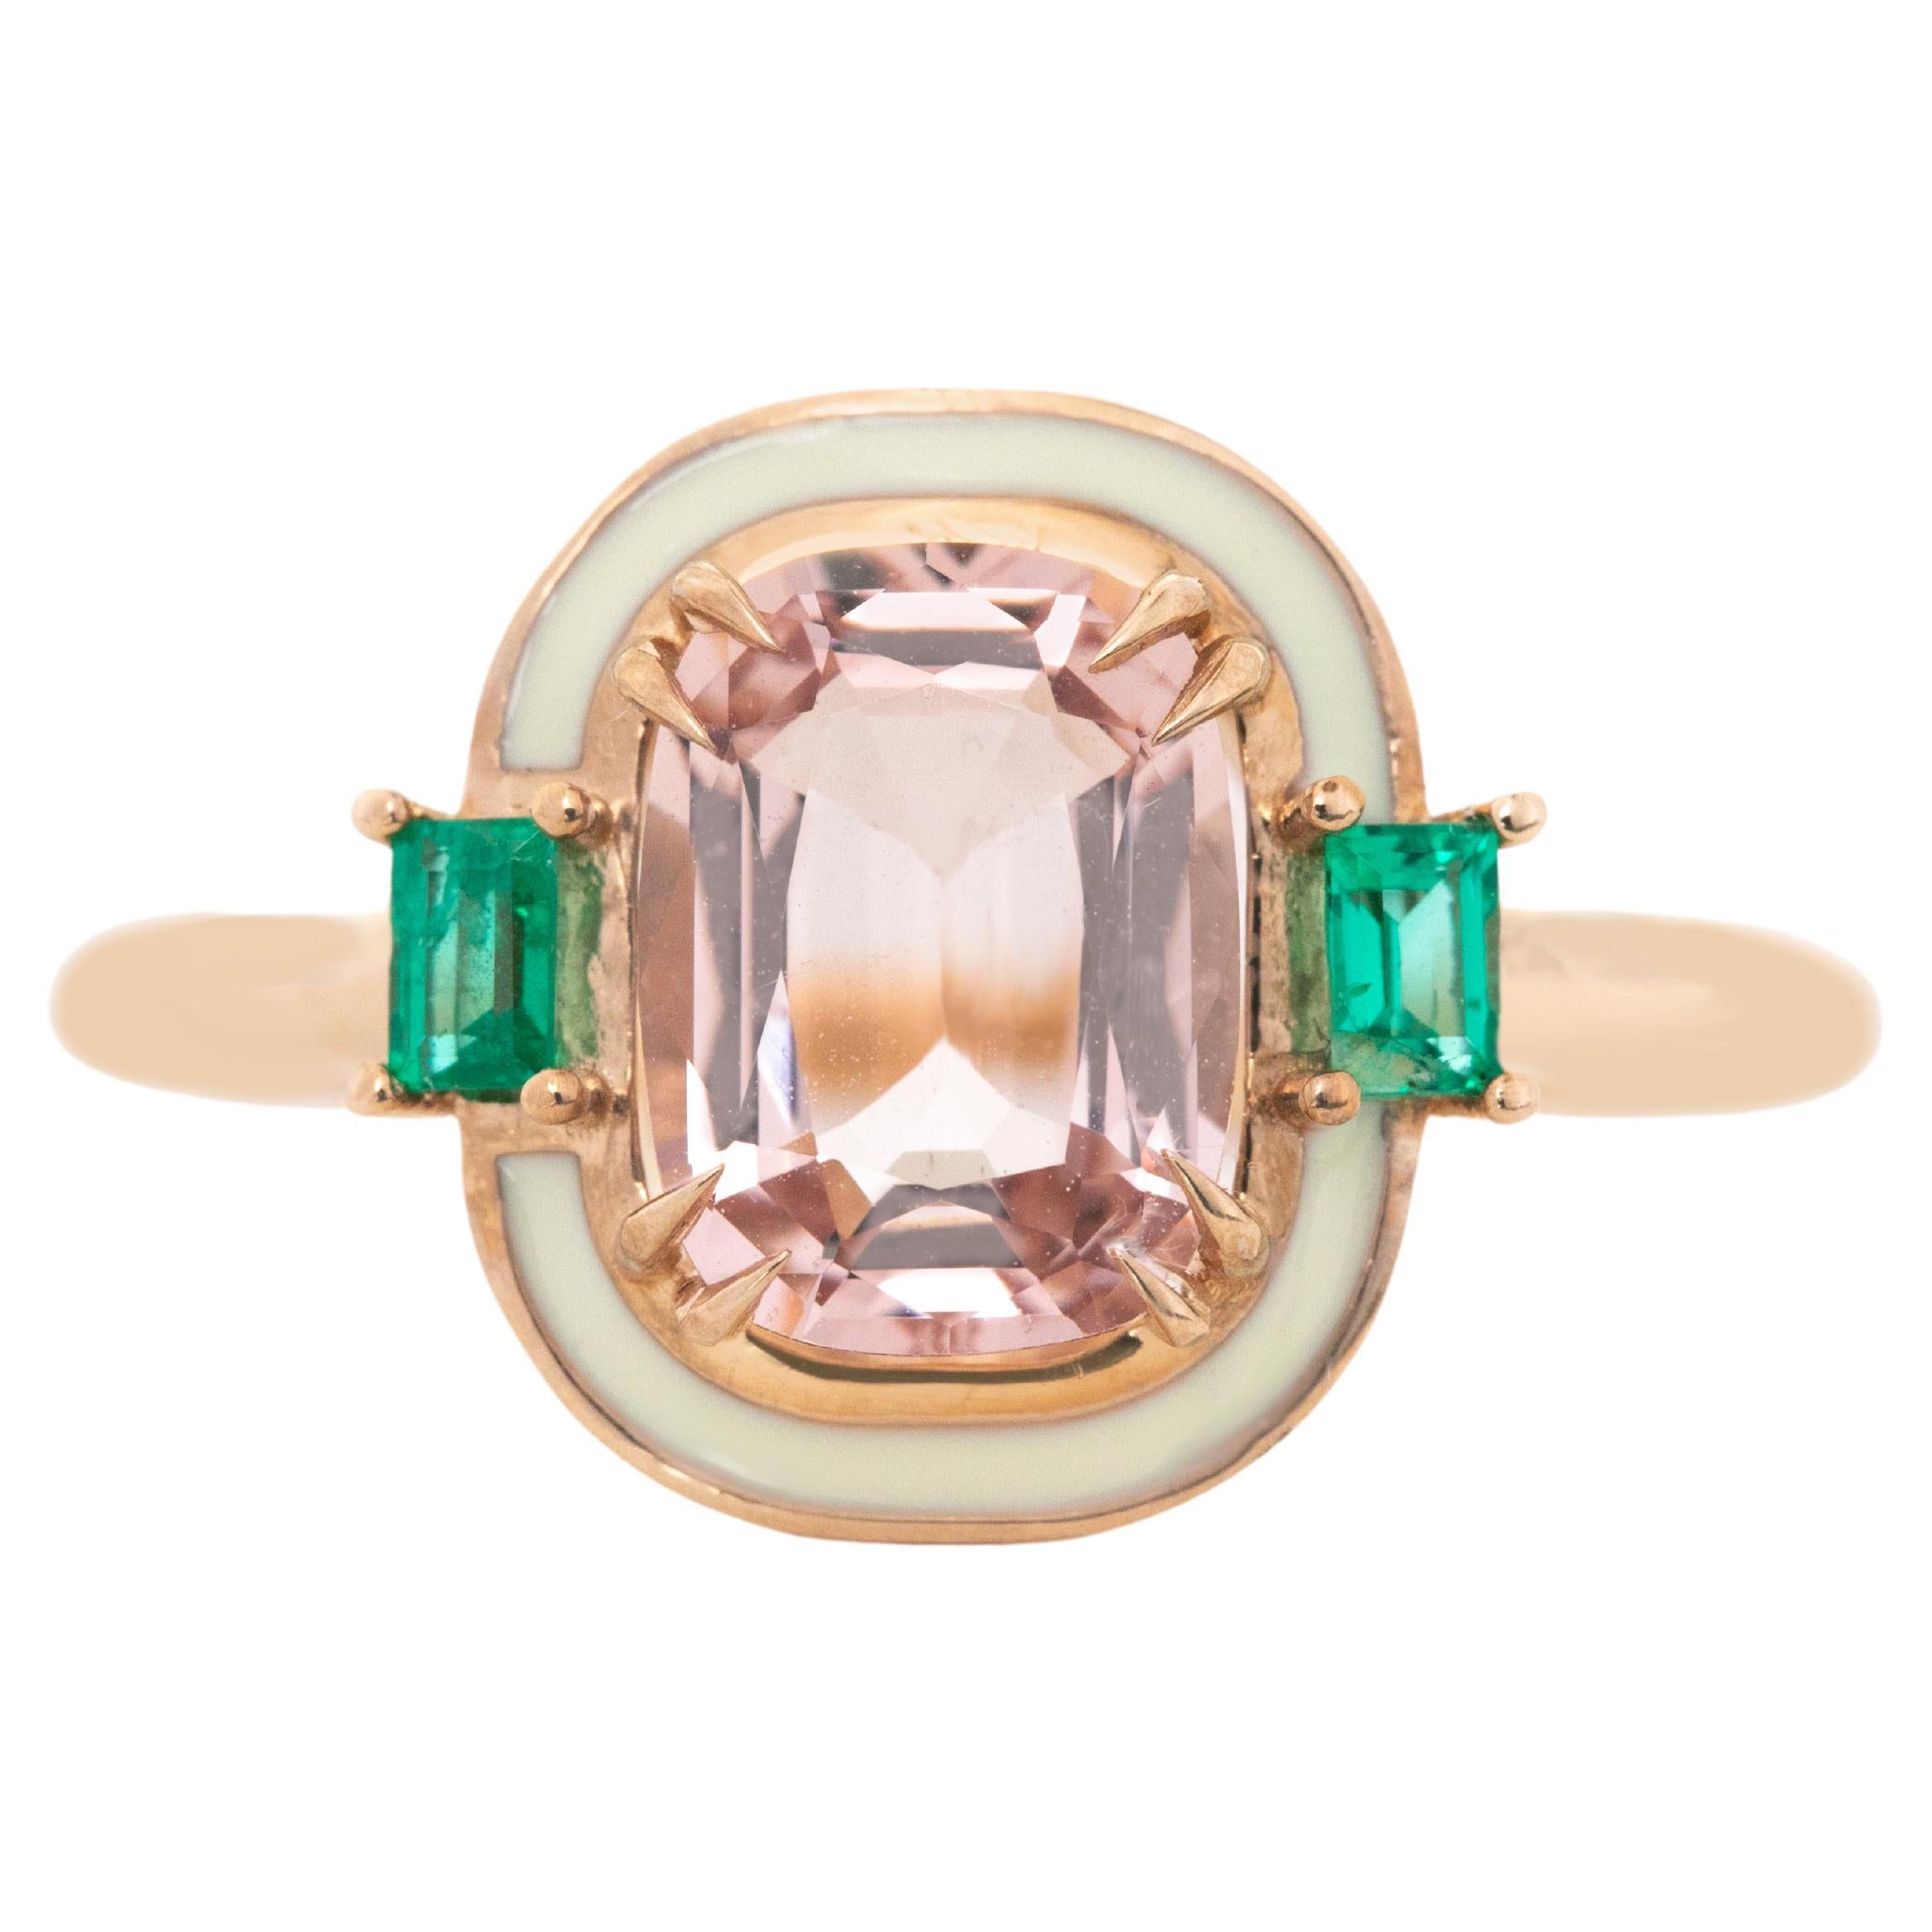 For Sale:  Artdeco Style, Enameled 14k Gold Morganite and Emerald Cocktail Ring